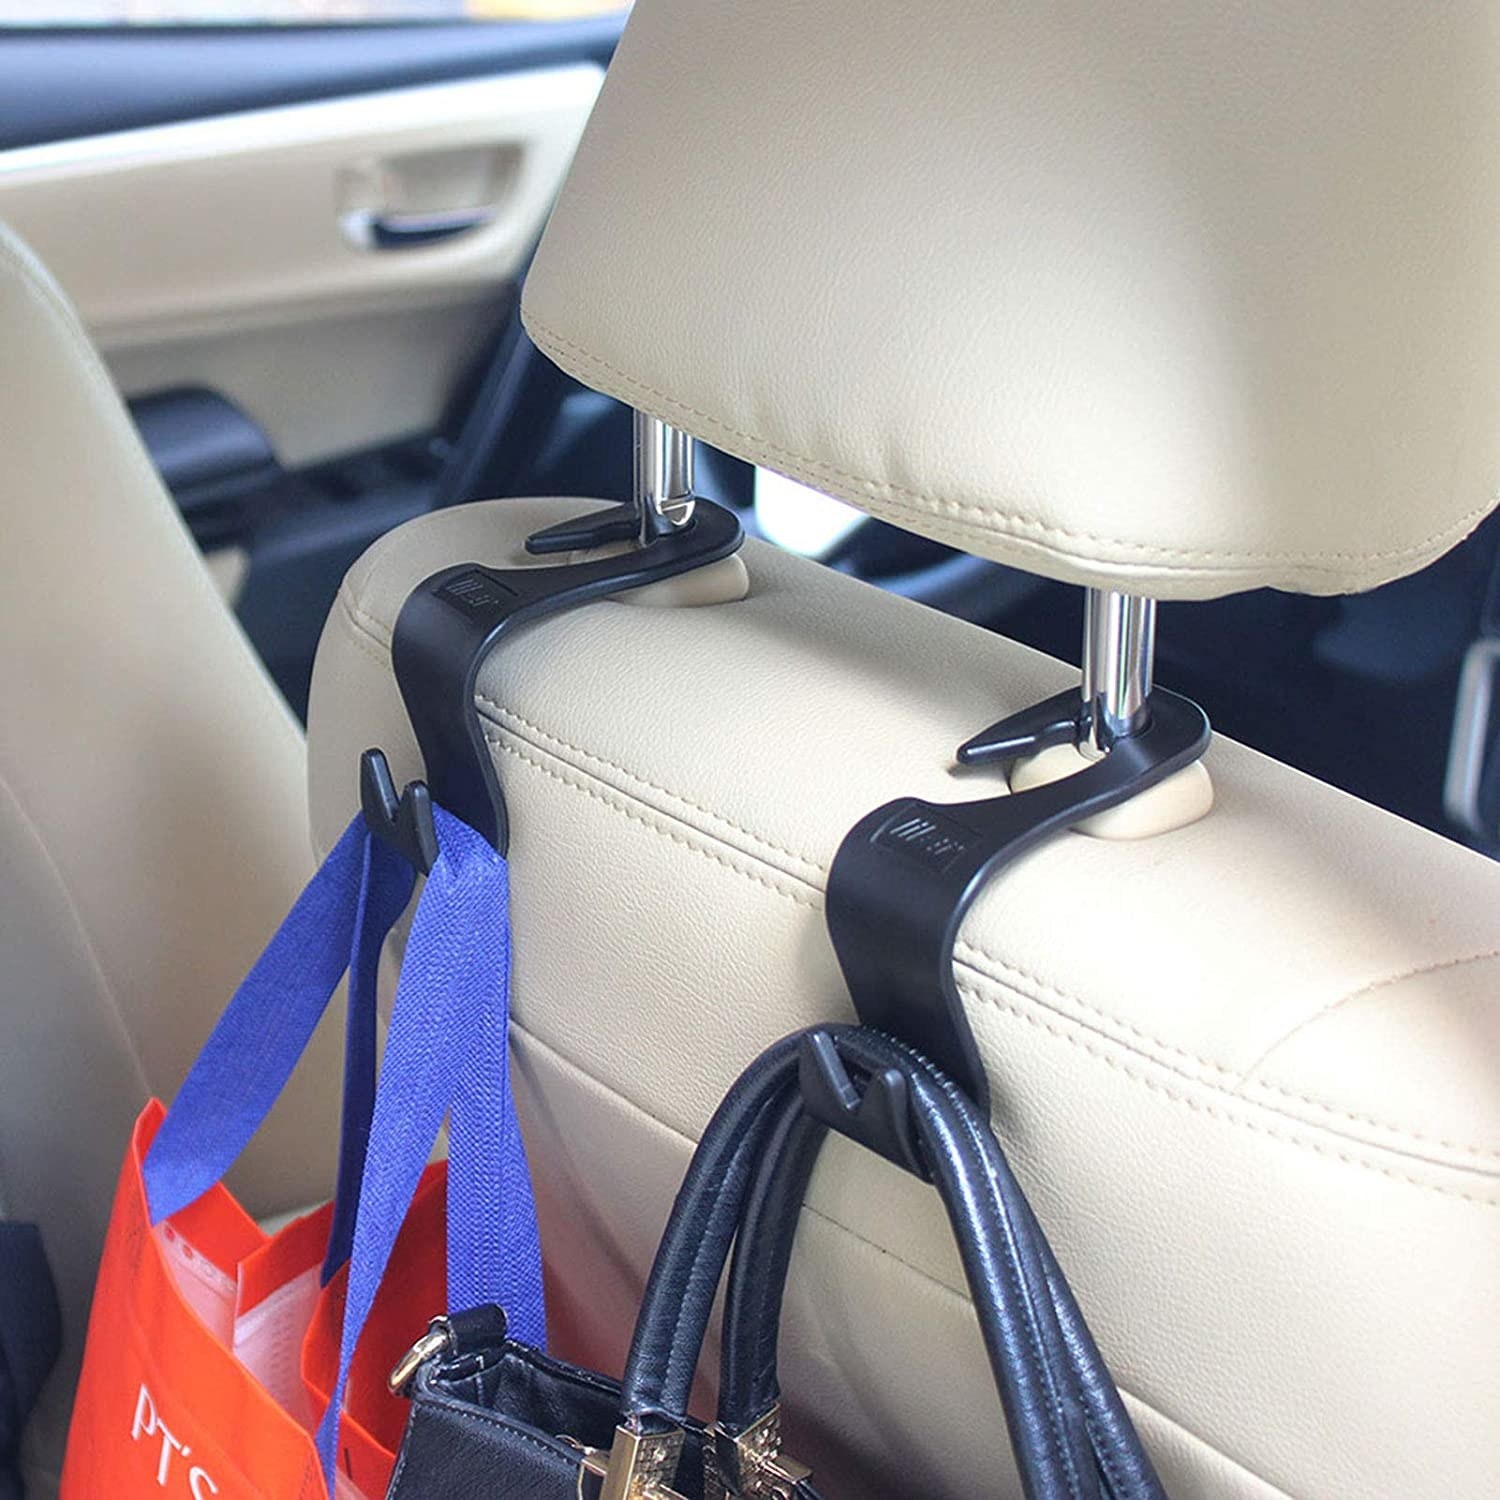 the hooks holding up bags while hanging from a headrest